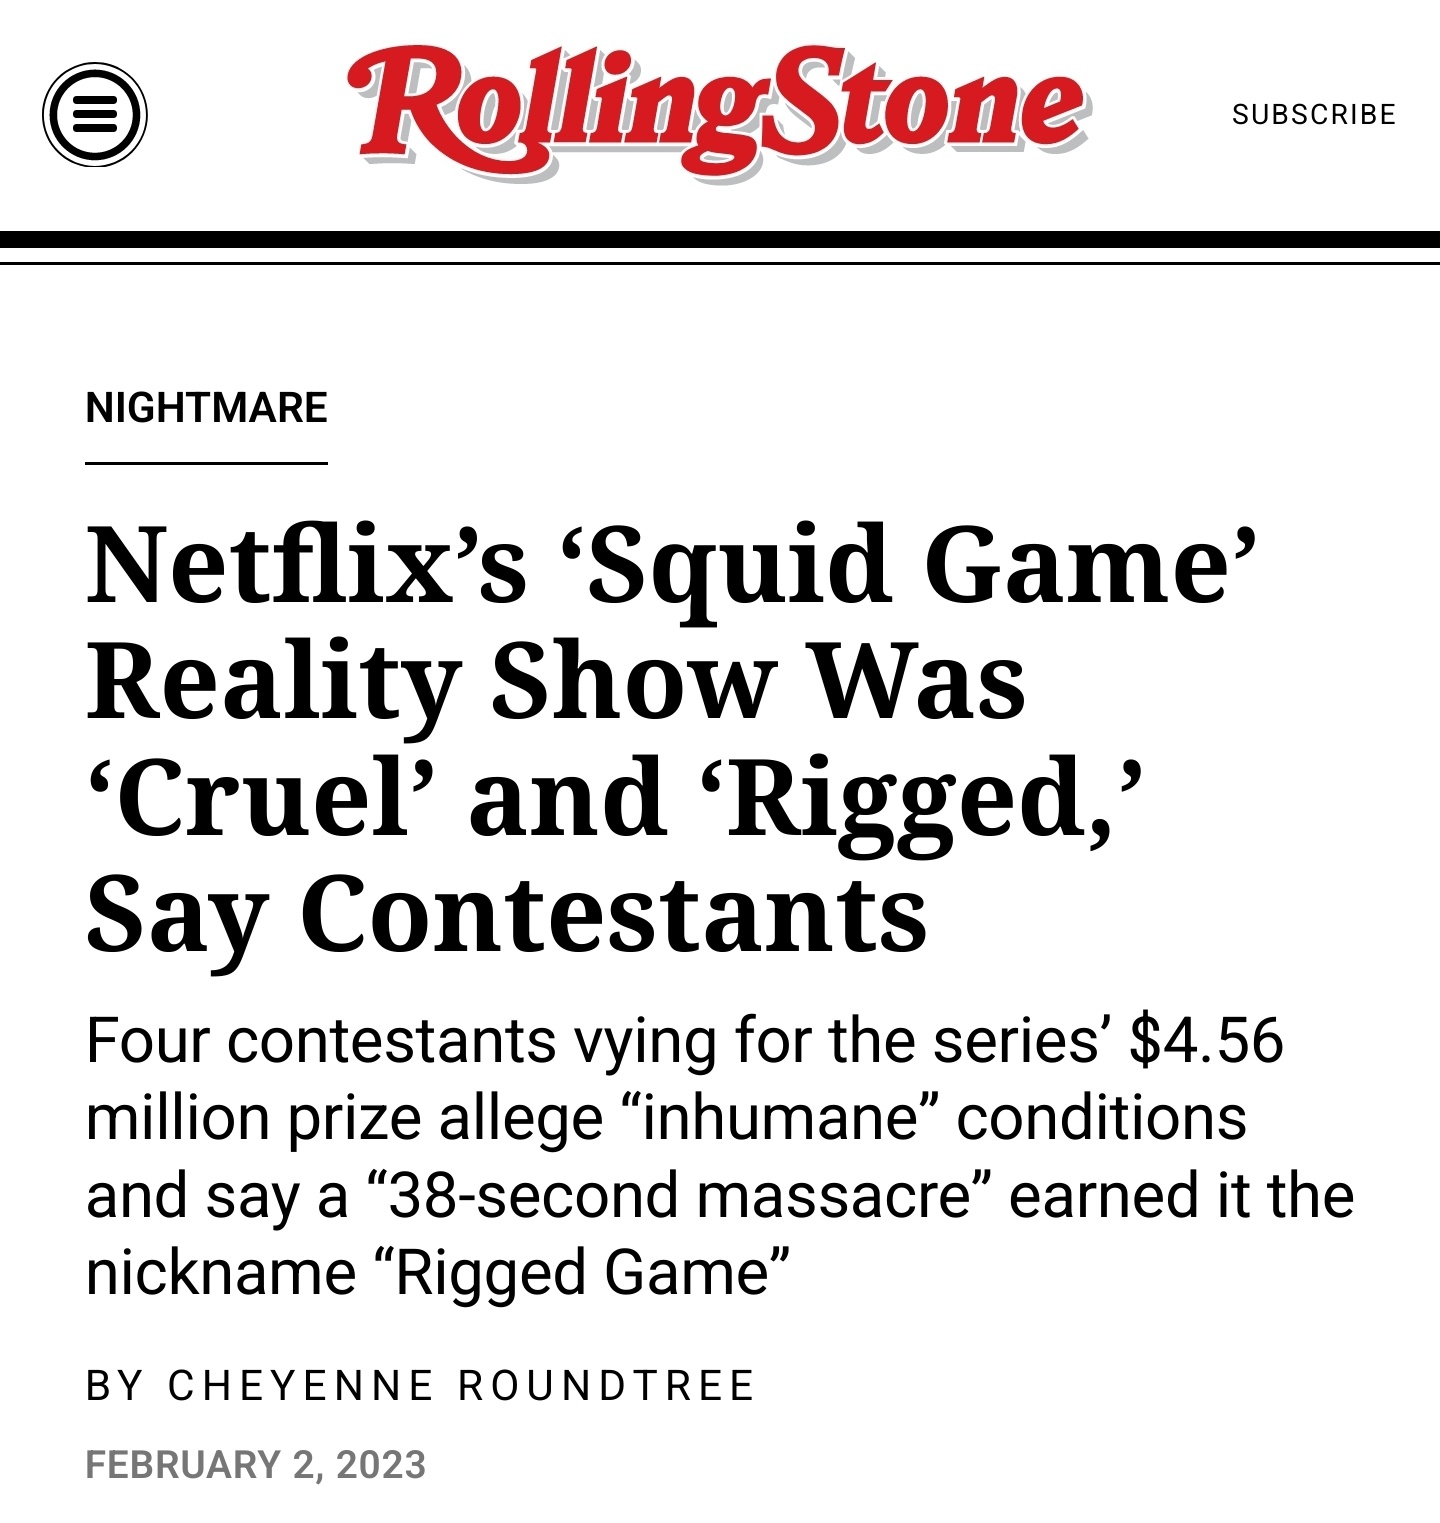 Contestants: Netflix's 'Squid Game' Reality Show 'Cruel' and 'Rigged